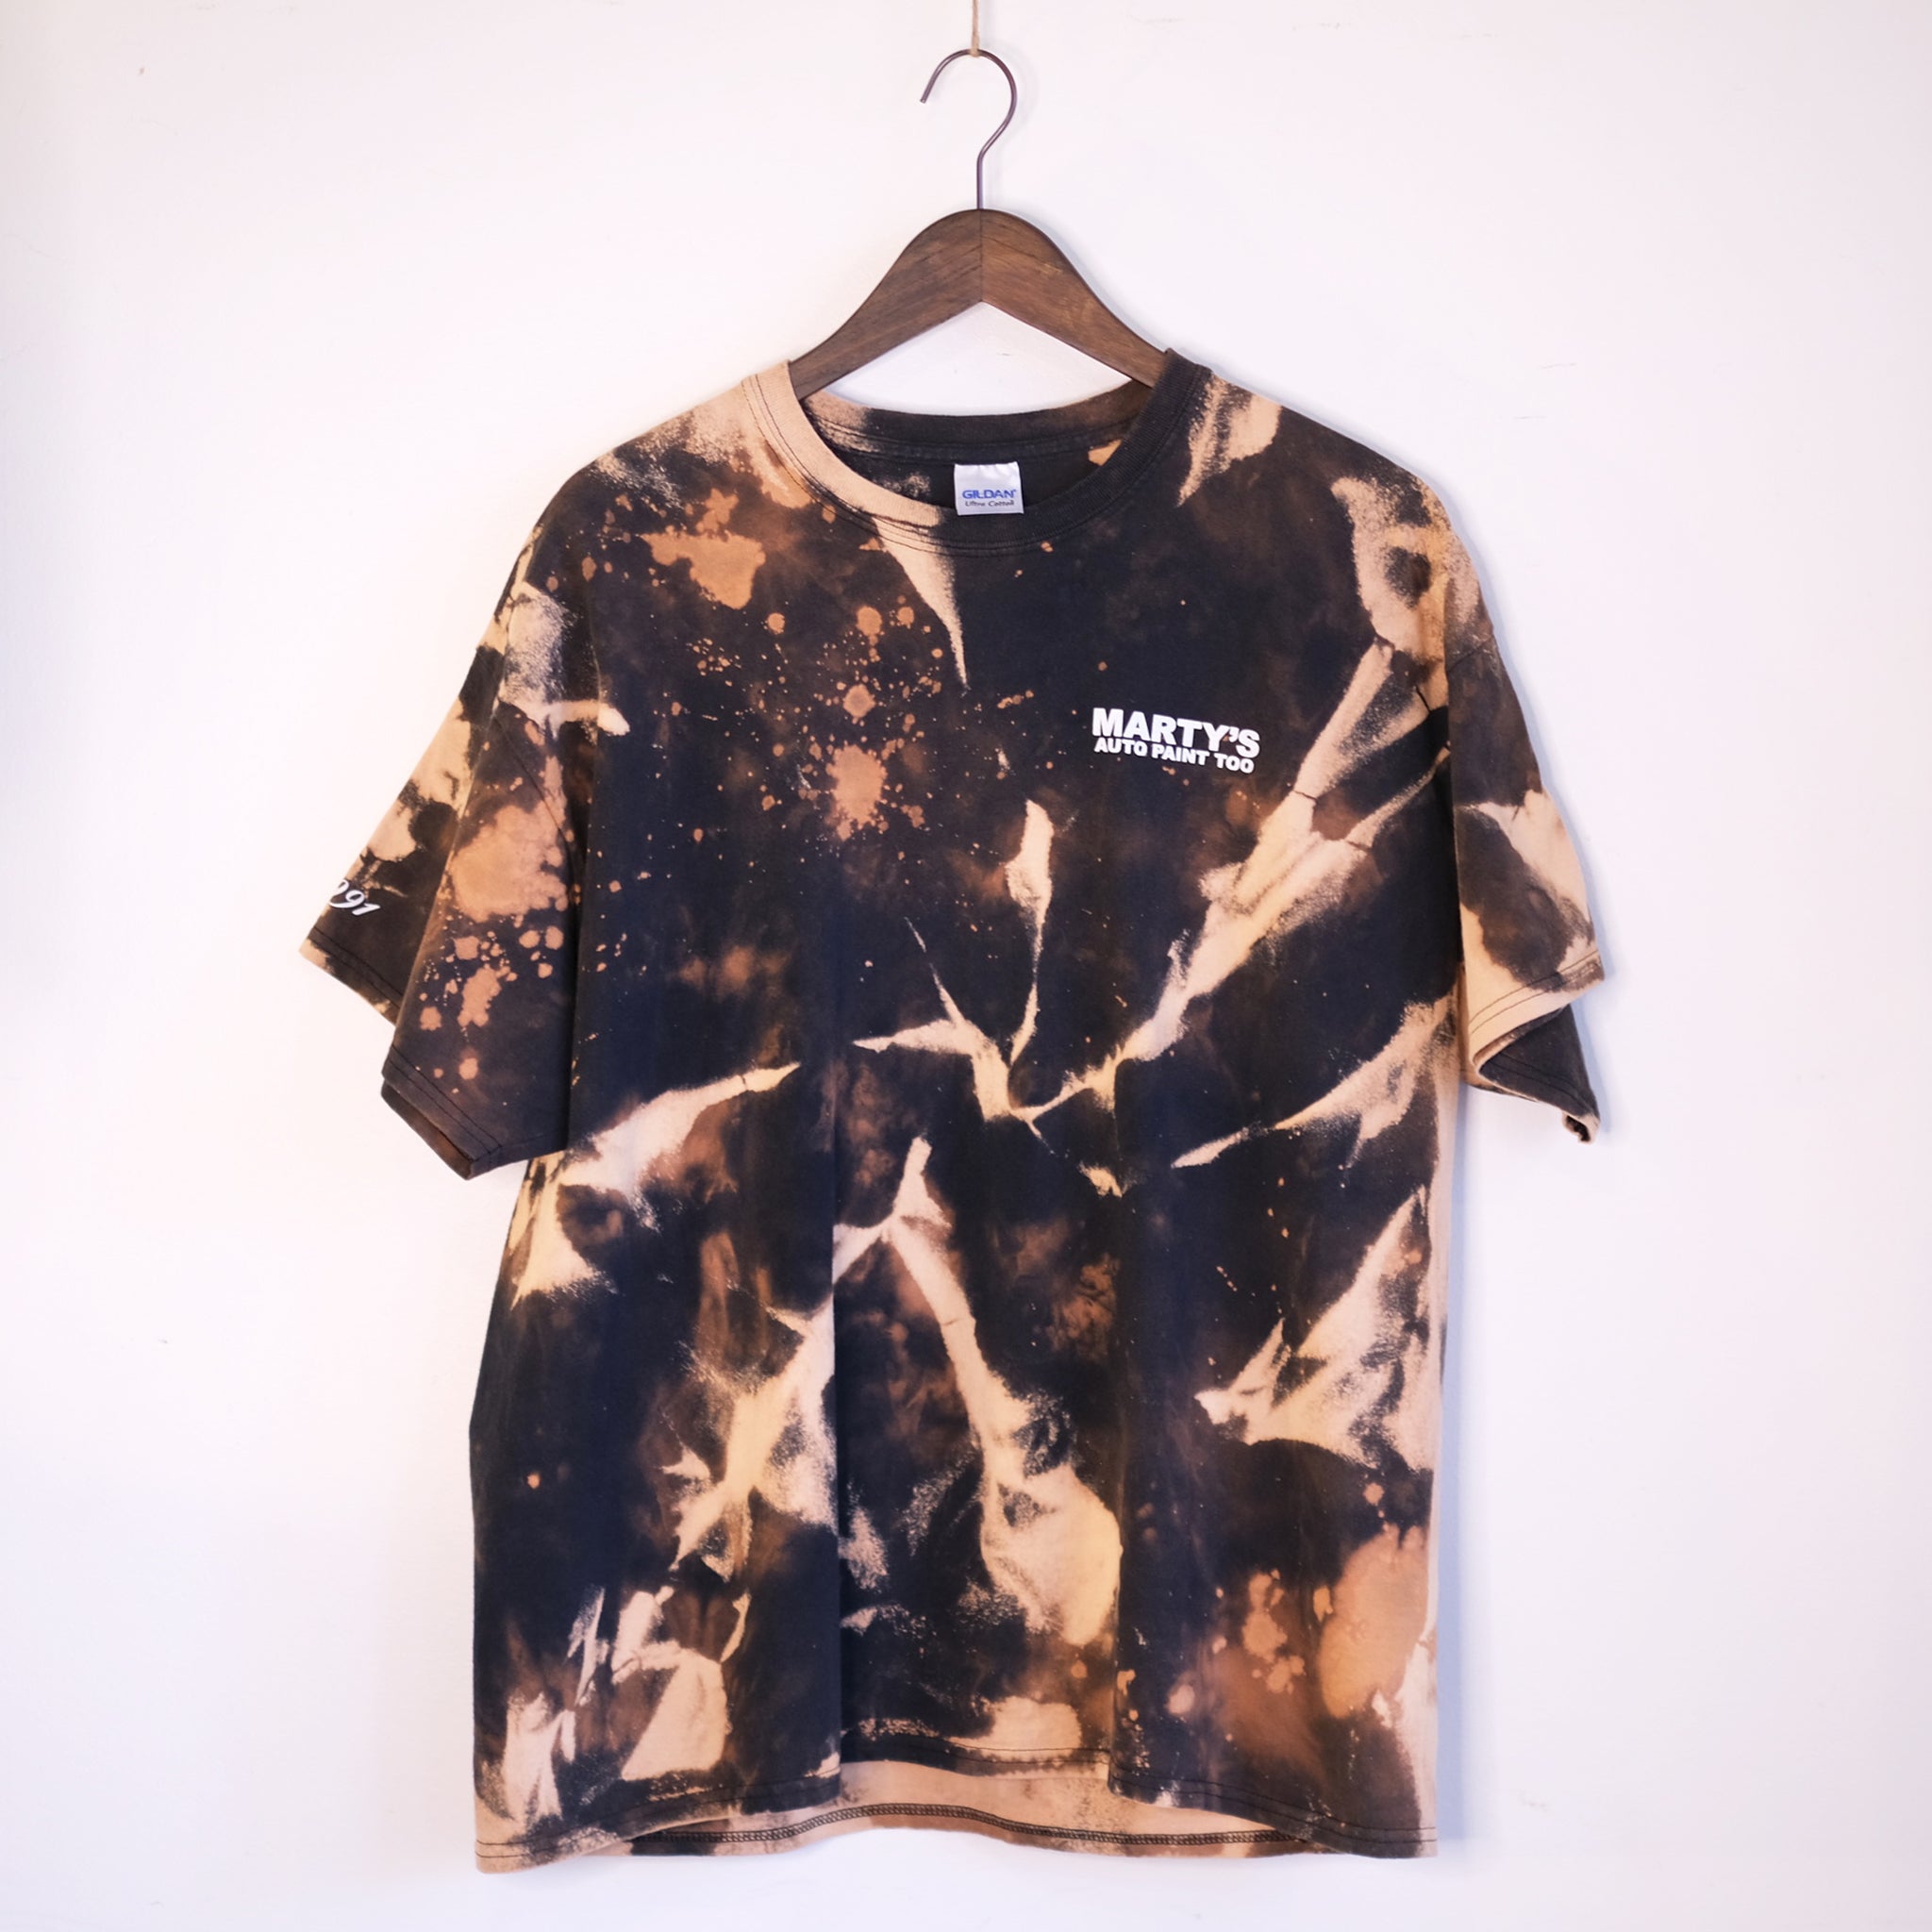 Bleached Marty's Auto T-Shirt